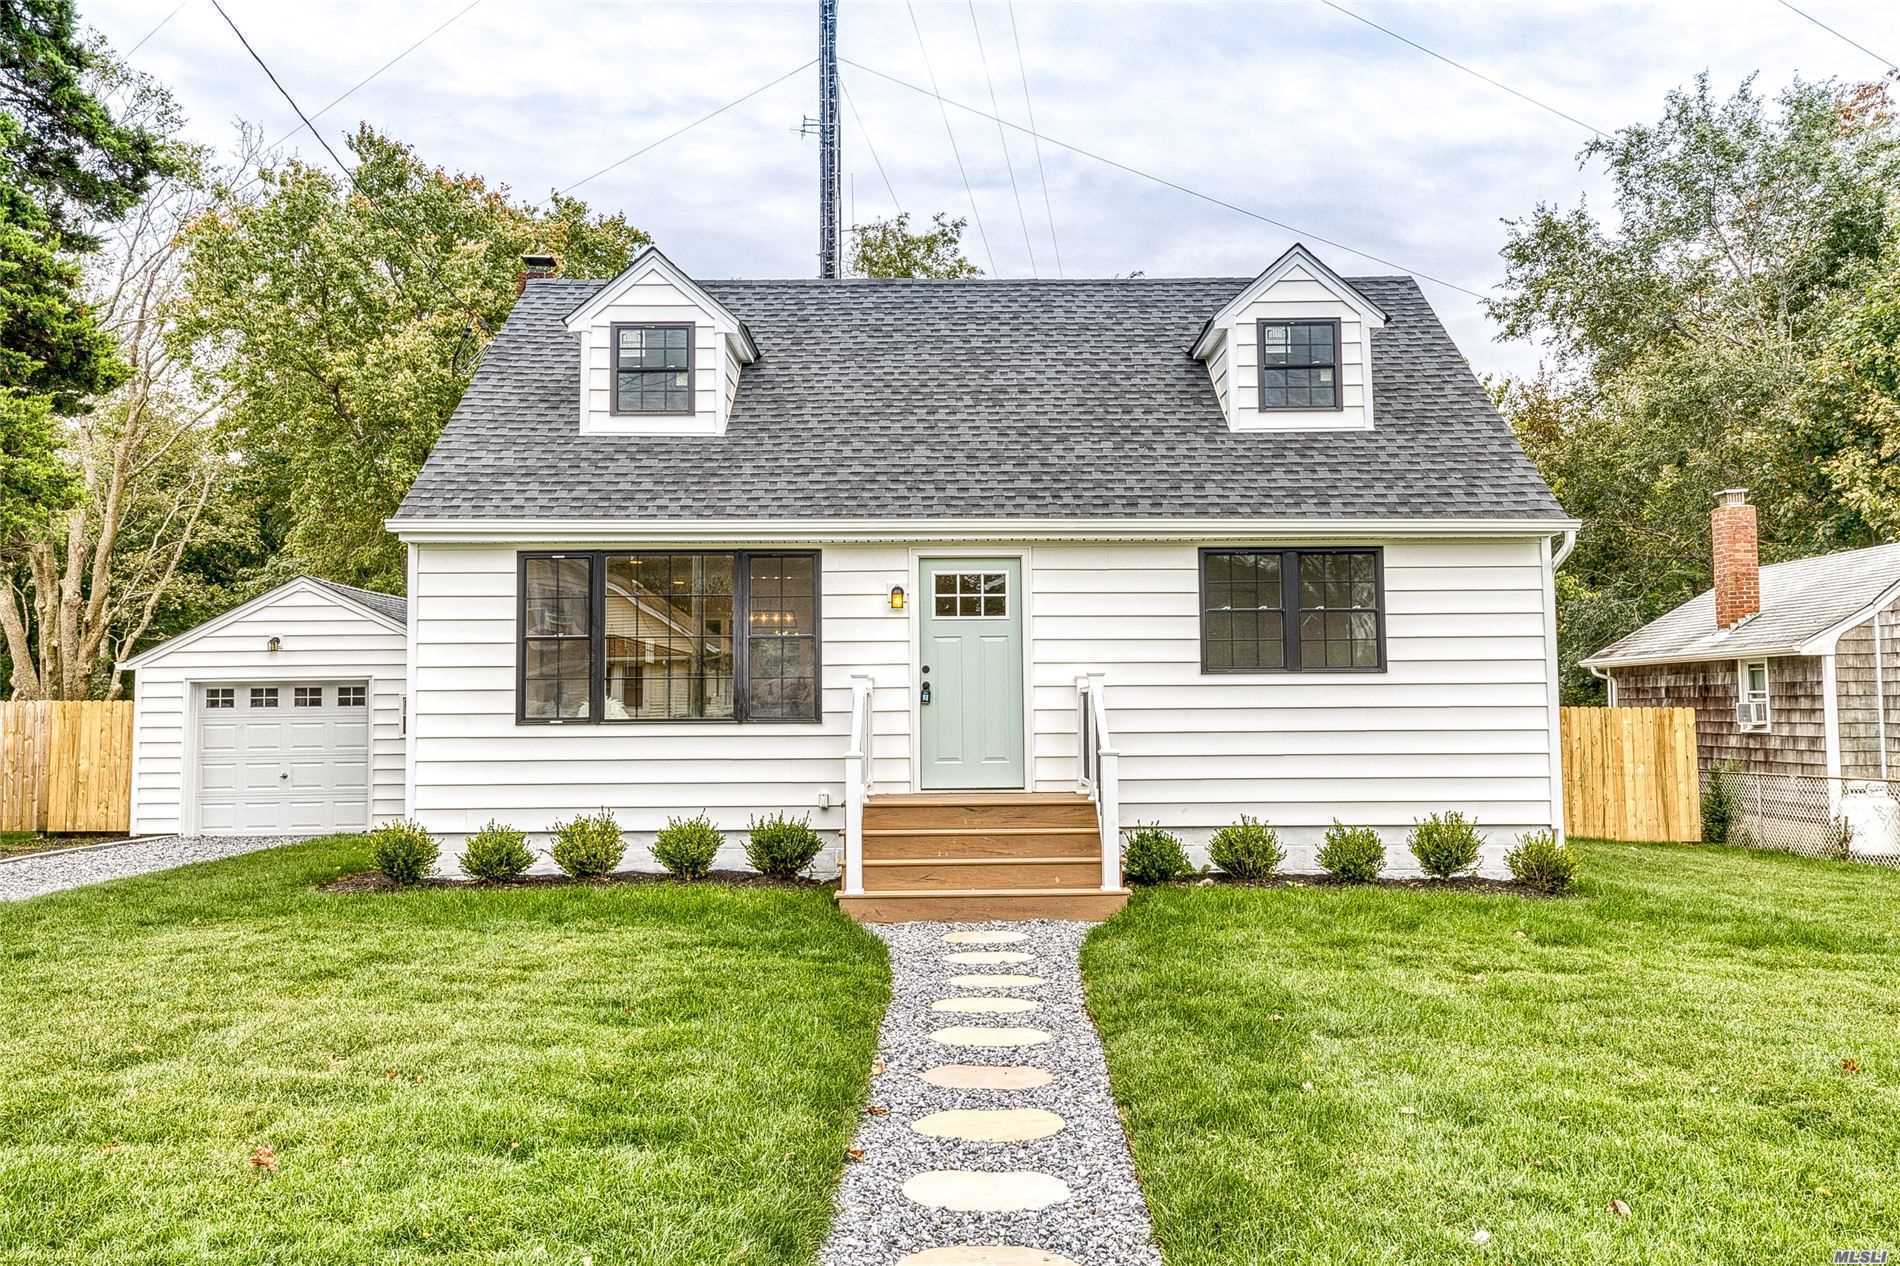 Expanded 2 Story Cape With Open Concept. Significant Remodel With High End Finishes. New Mechanicals & Heating System, CAC Plus Many More Luxury Amenities. Wonderful Private Yard, 4 Spacious BRs And Detached Garage. Right In The Heart Of Greenport Village!